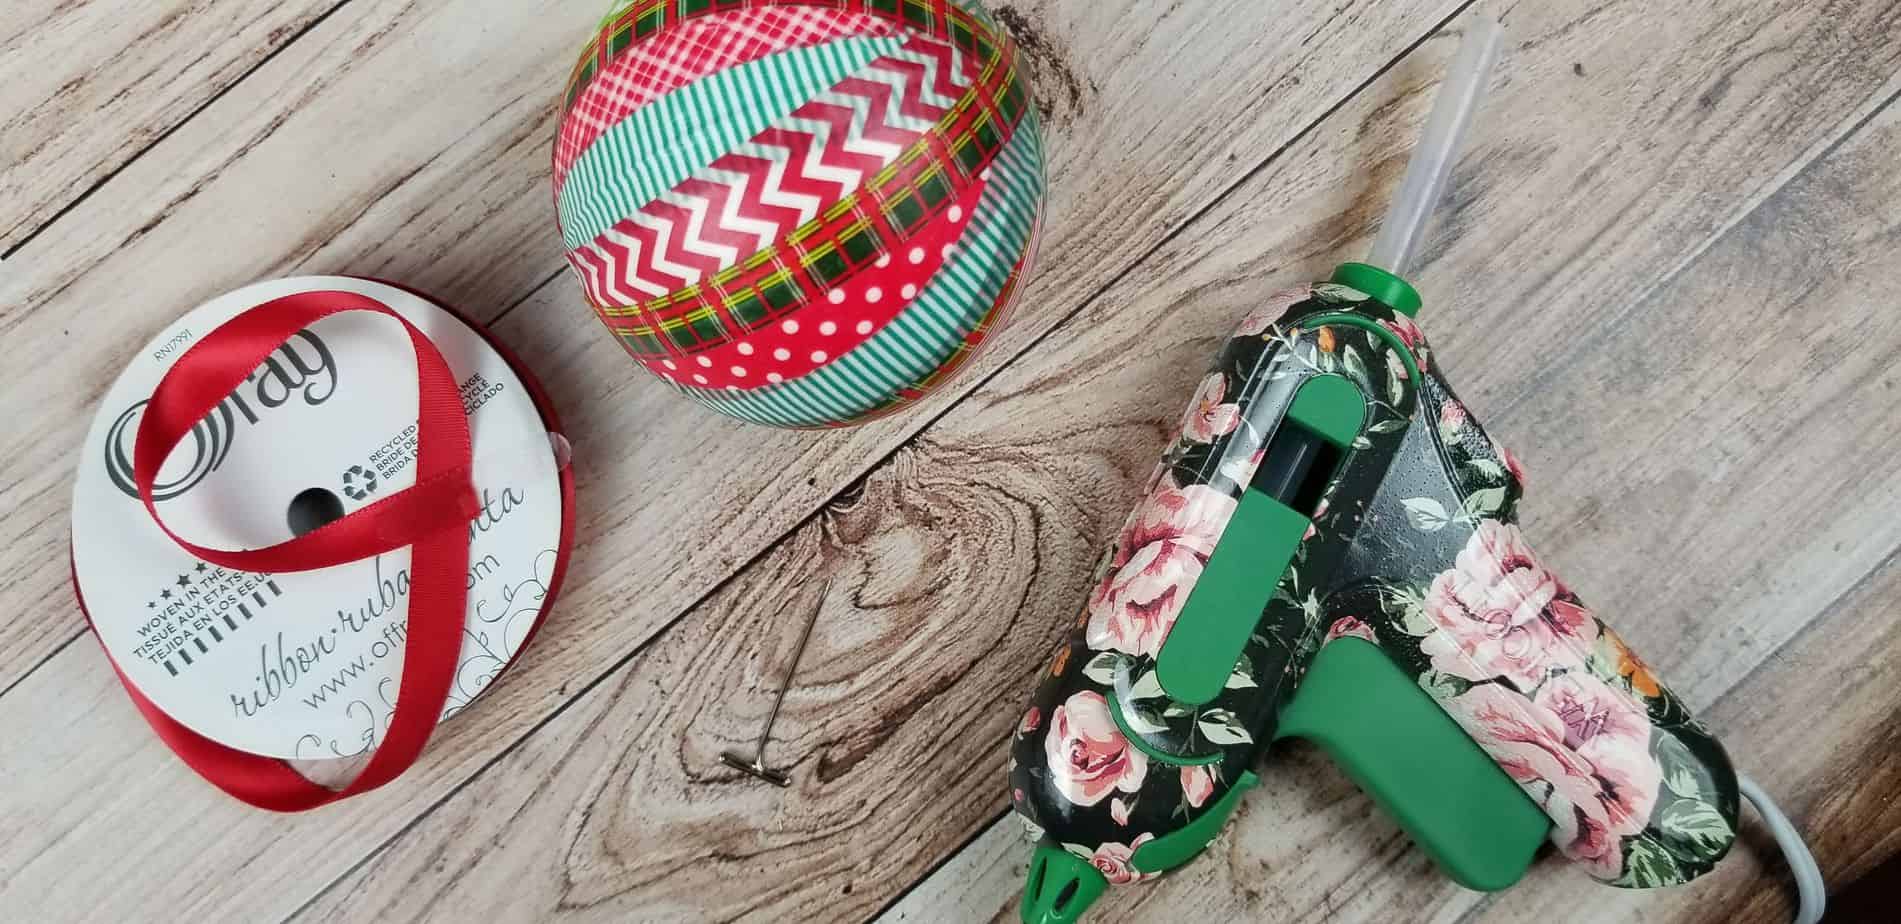 an ornament wrapped in red and green washi tape next to some red ribbon and a hot glue gun on a wooden table